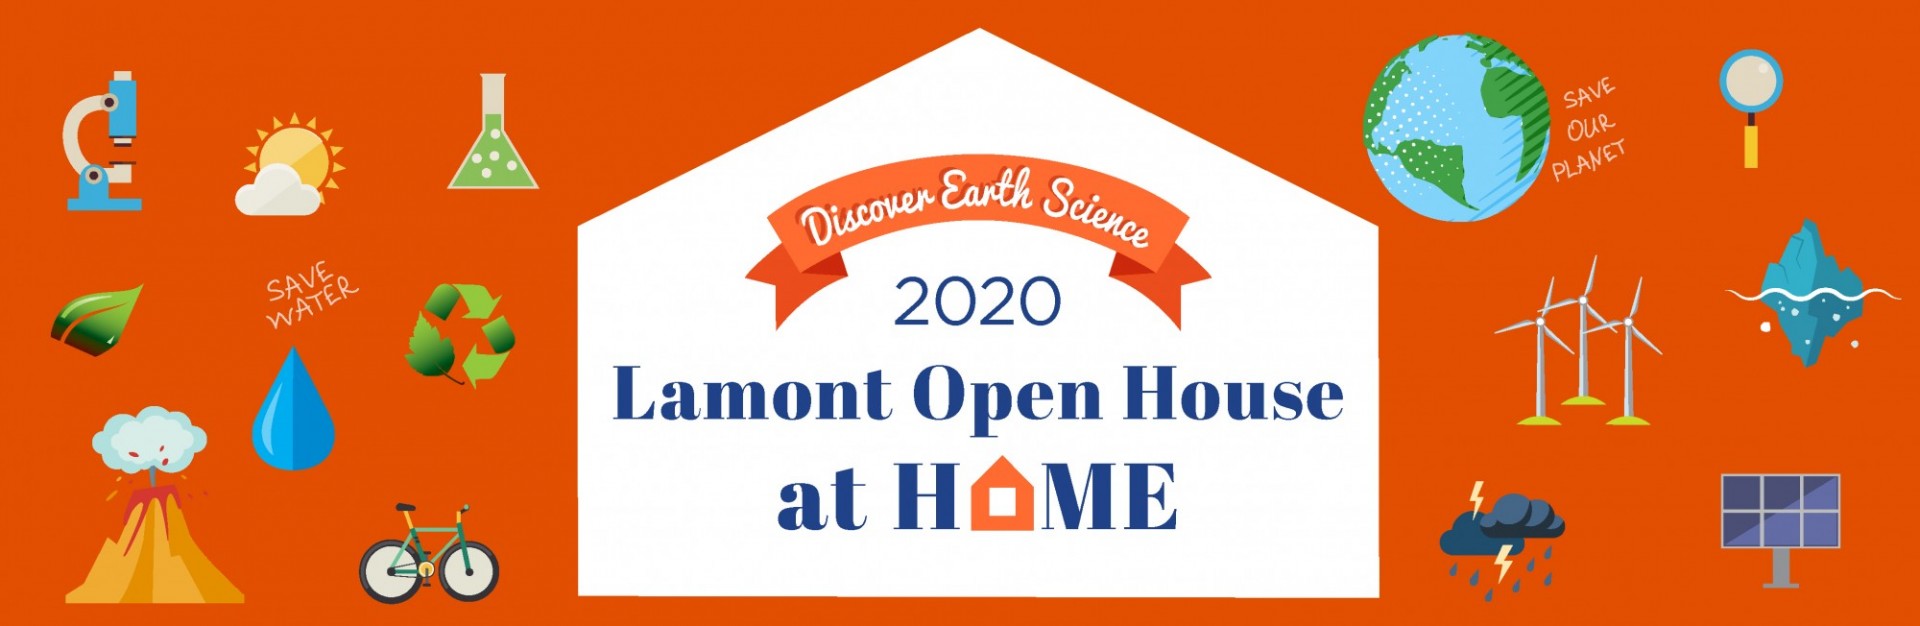 Lamont Open House at Home banner